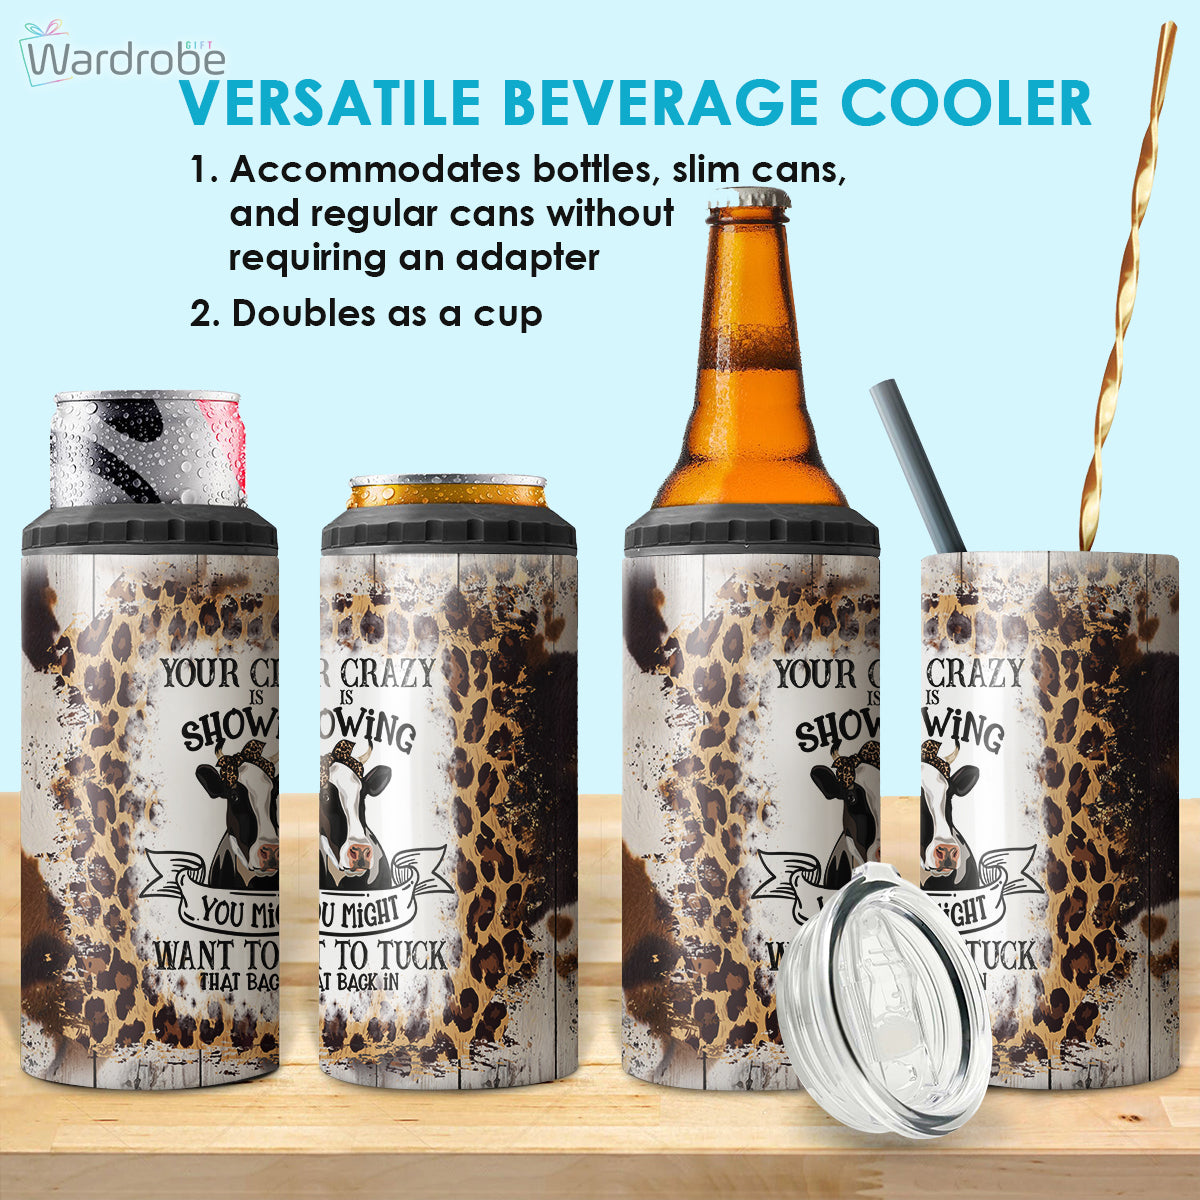 Your Crazy Is Showing You Might Want To Tuck That Back In Funny Cow 4 in 1 Can Cooler 16Oz Tumbler Cup Bottle Cooler